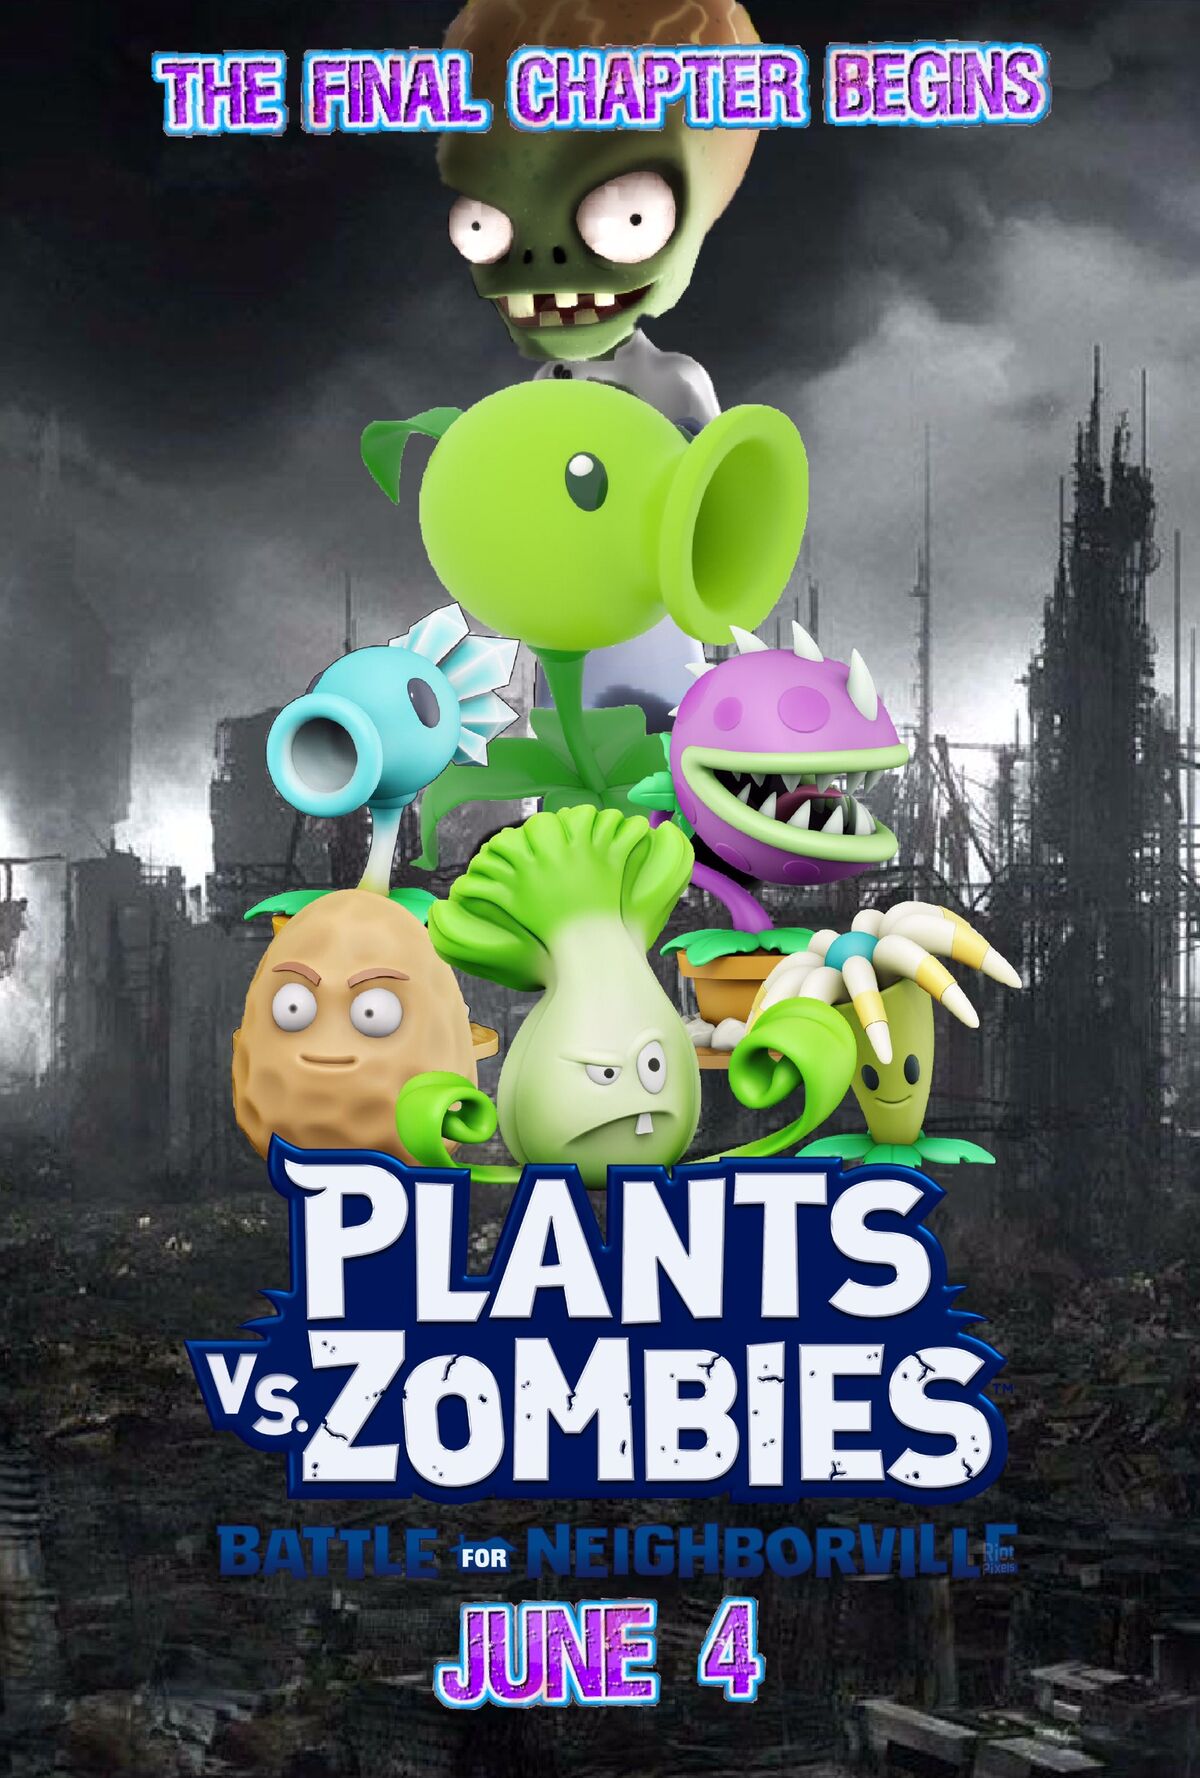 the poster of the movie plants vs zombiesgives me nightmares